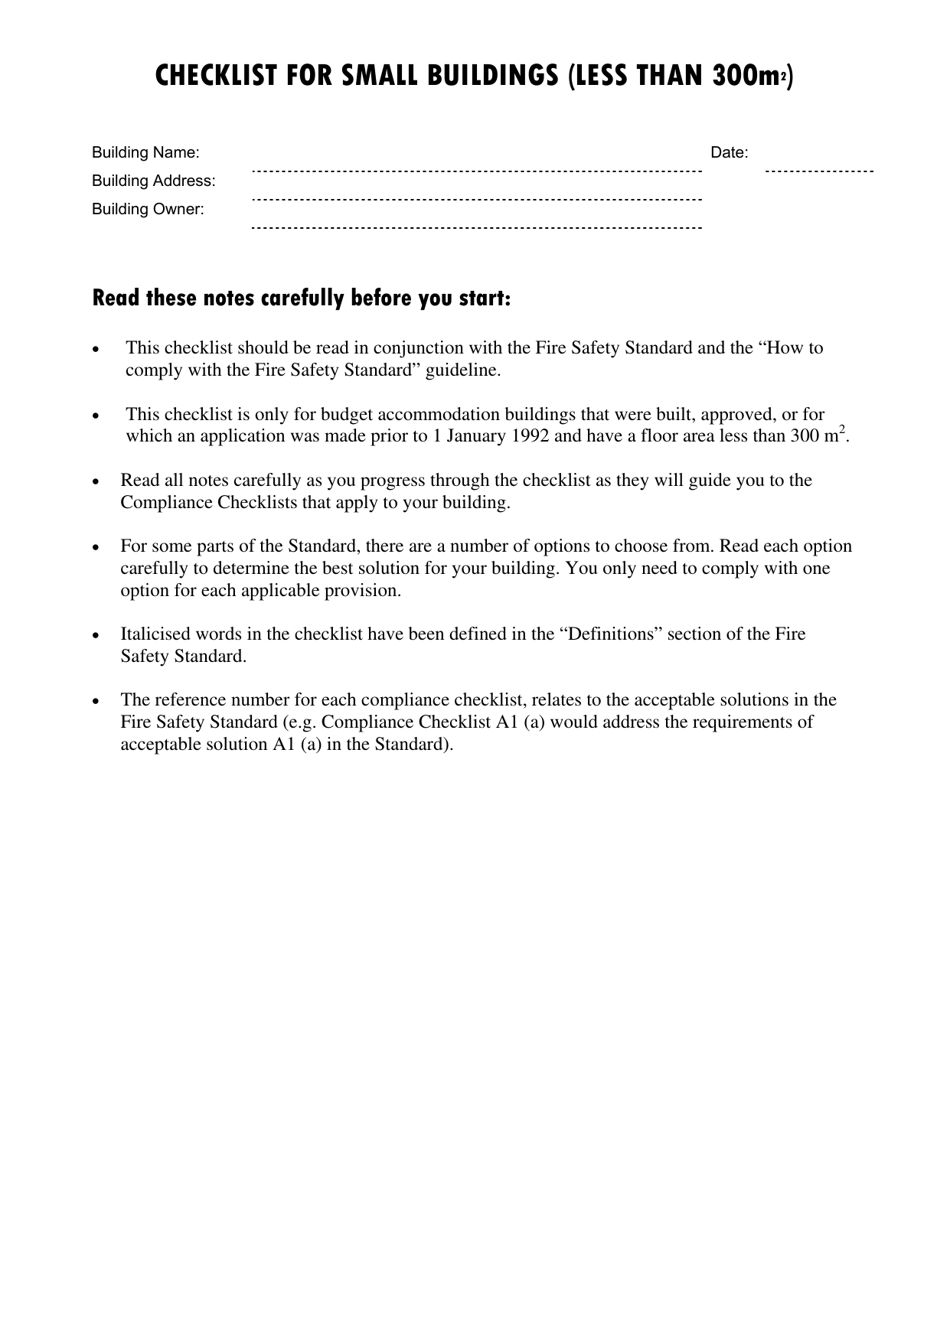 Checklist for Small Buildings (Less Than 300m2) - Queensland, Australia, Page 1